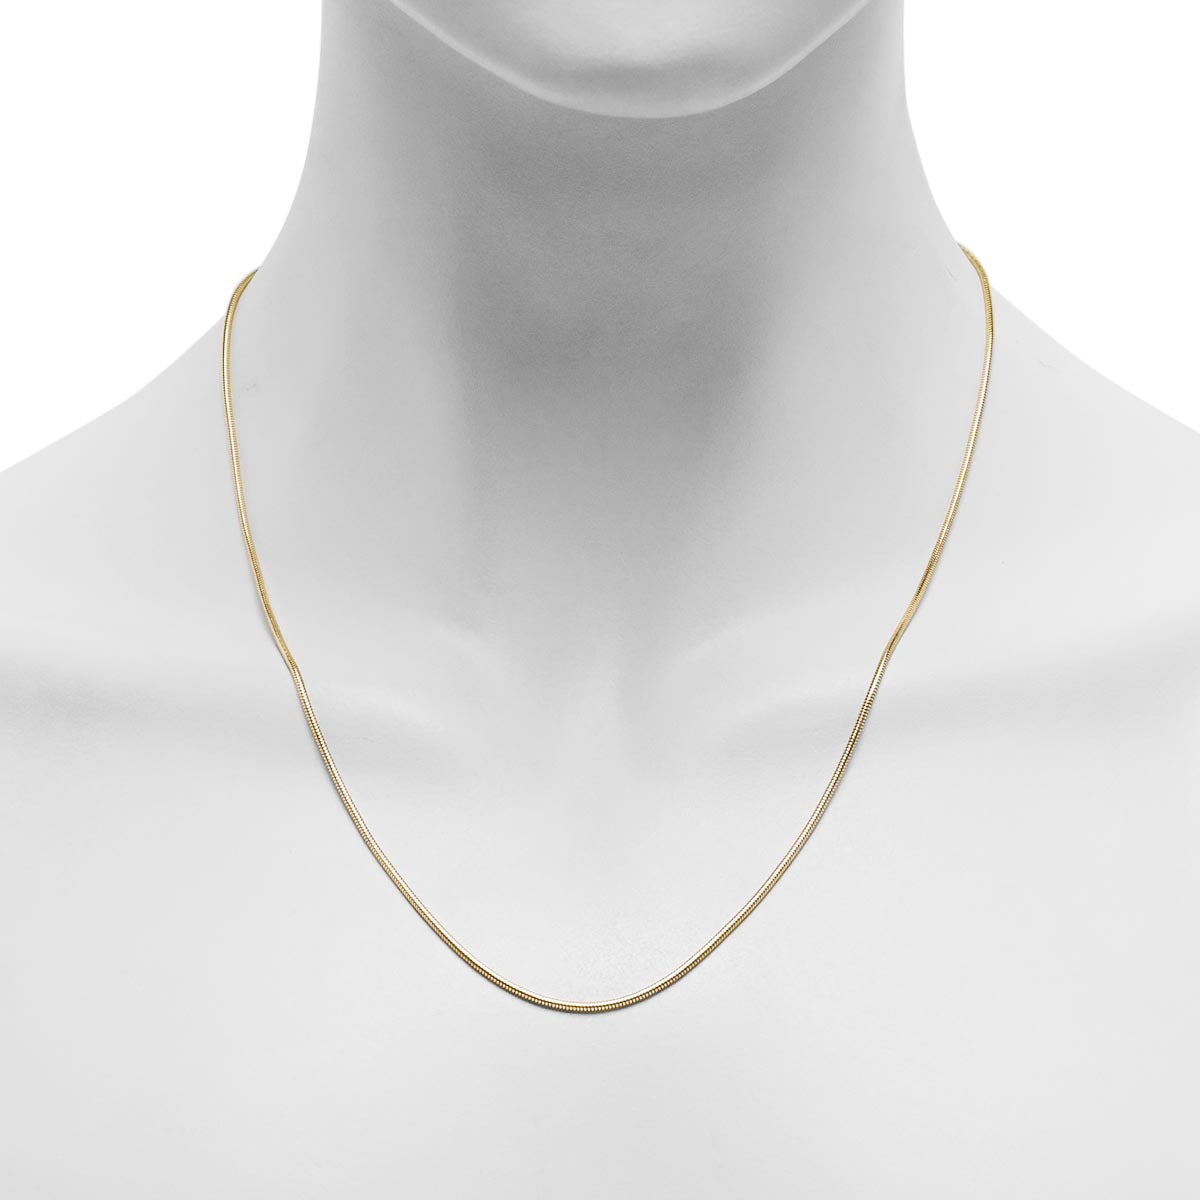 Estate Snake Chain in 14kt Yellow Gold (20 inches and 1.4mm wide)